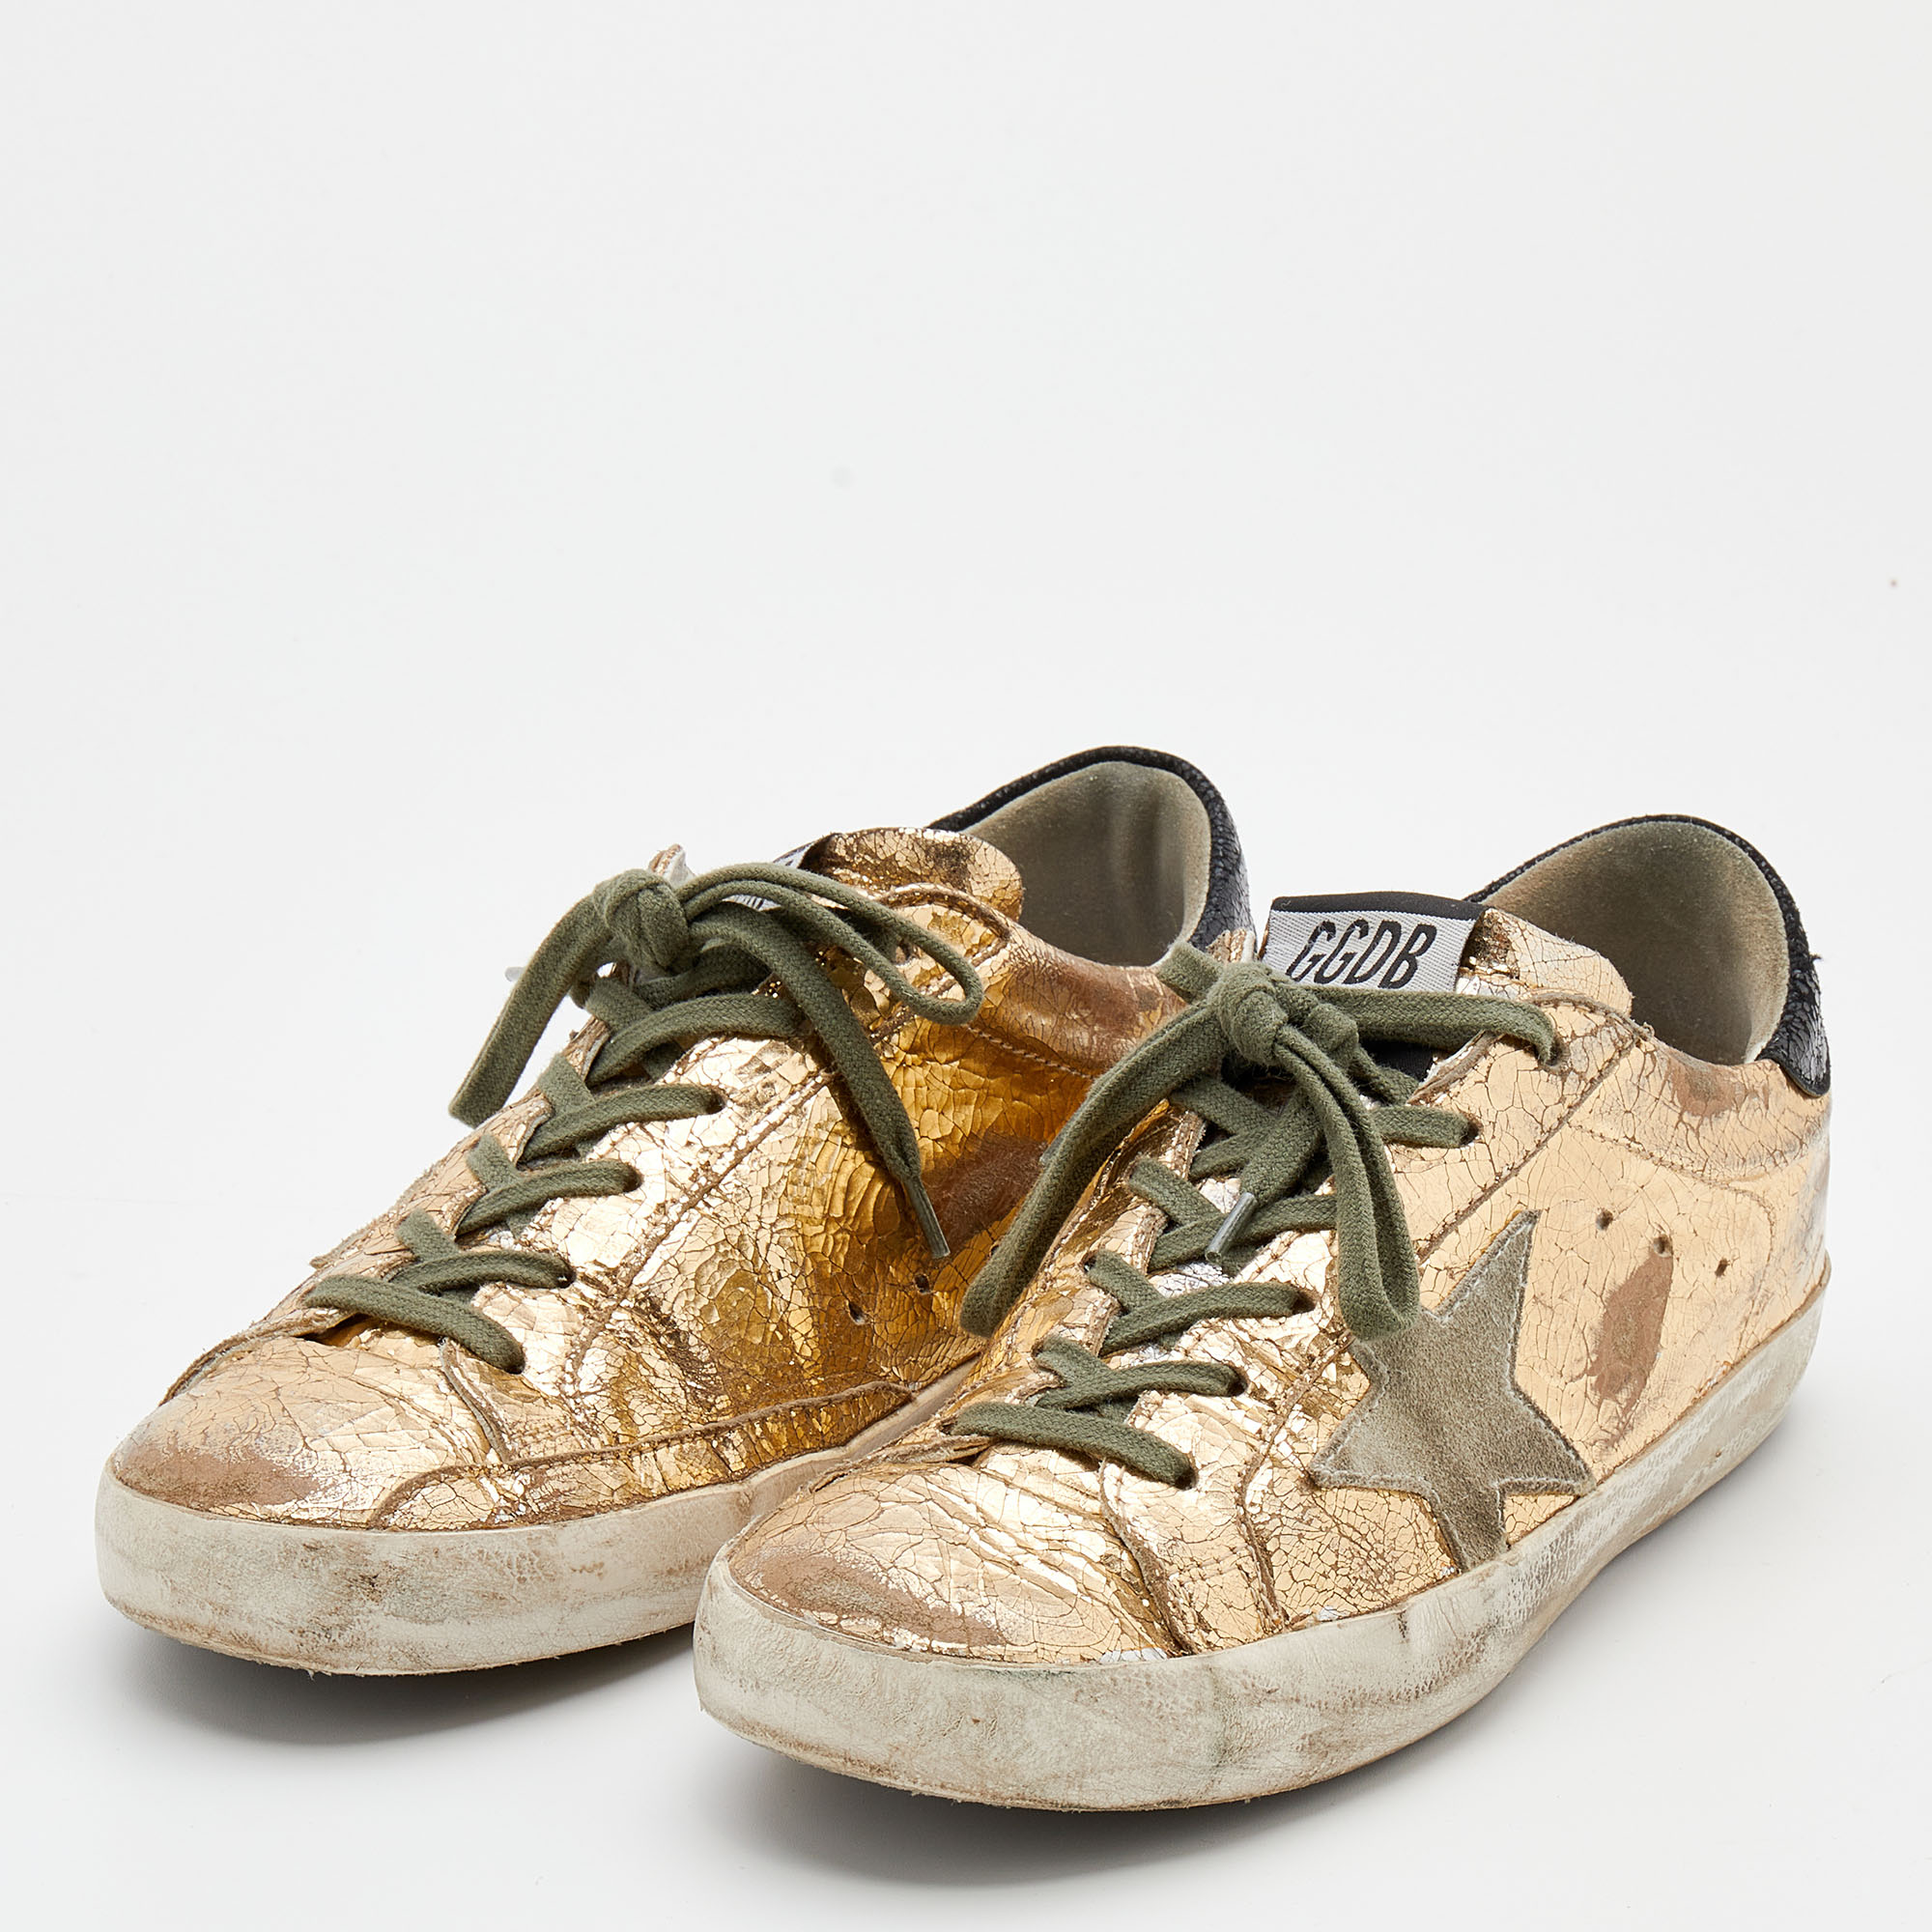 

Golden Goose Gold Laminated Leather And Suede Superstar Sneakers Size